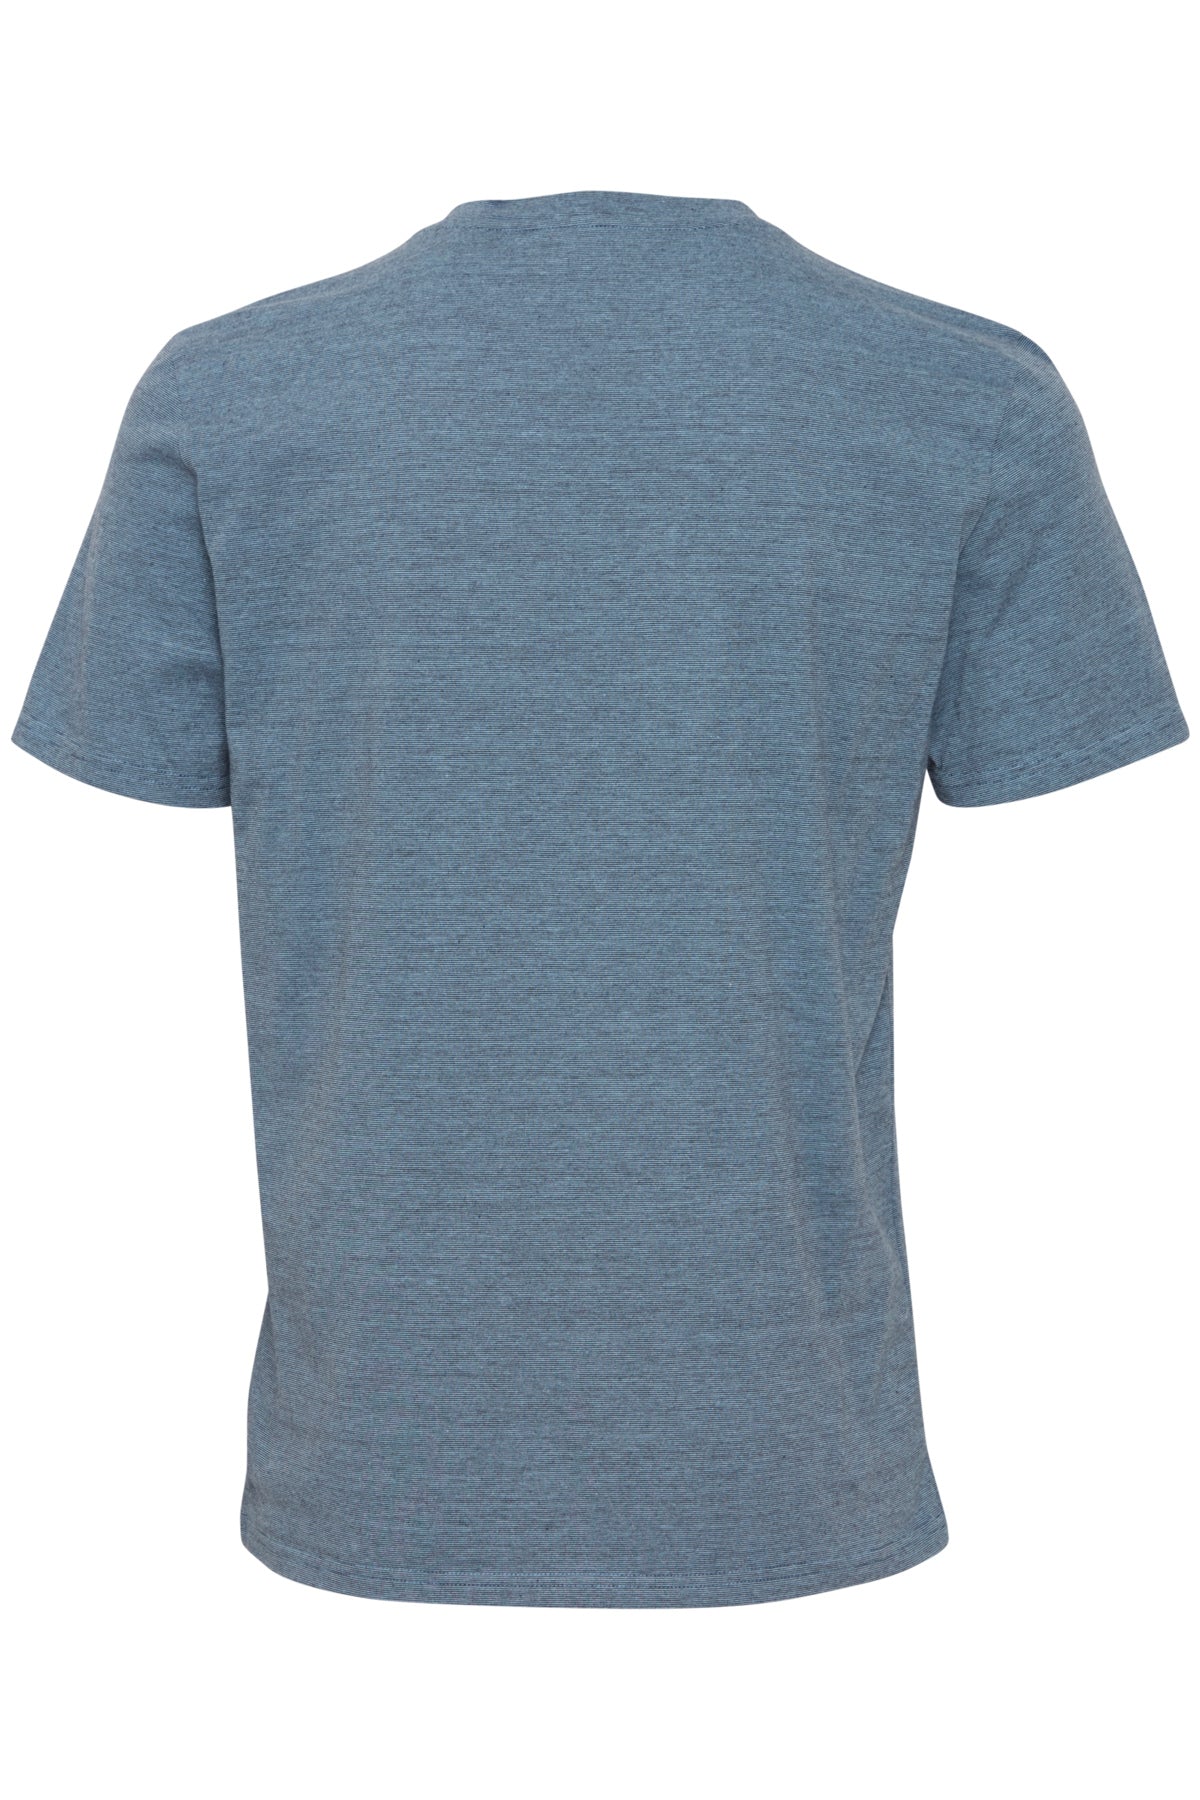 Thor Micro Striped Tee - Dusk Blue - The Sons online